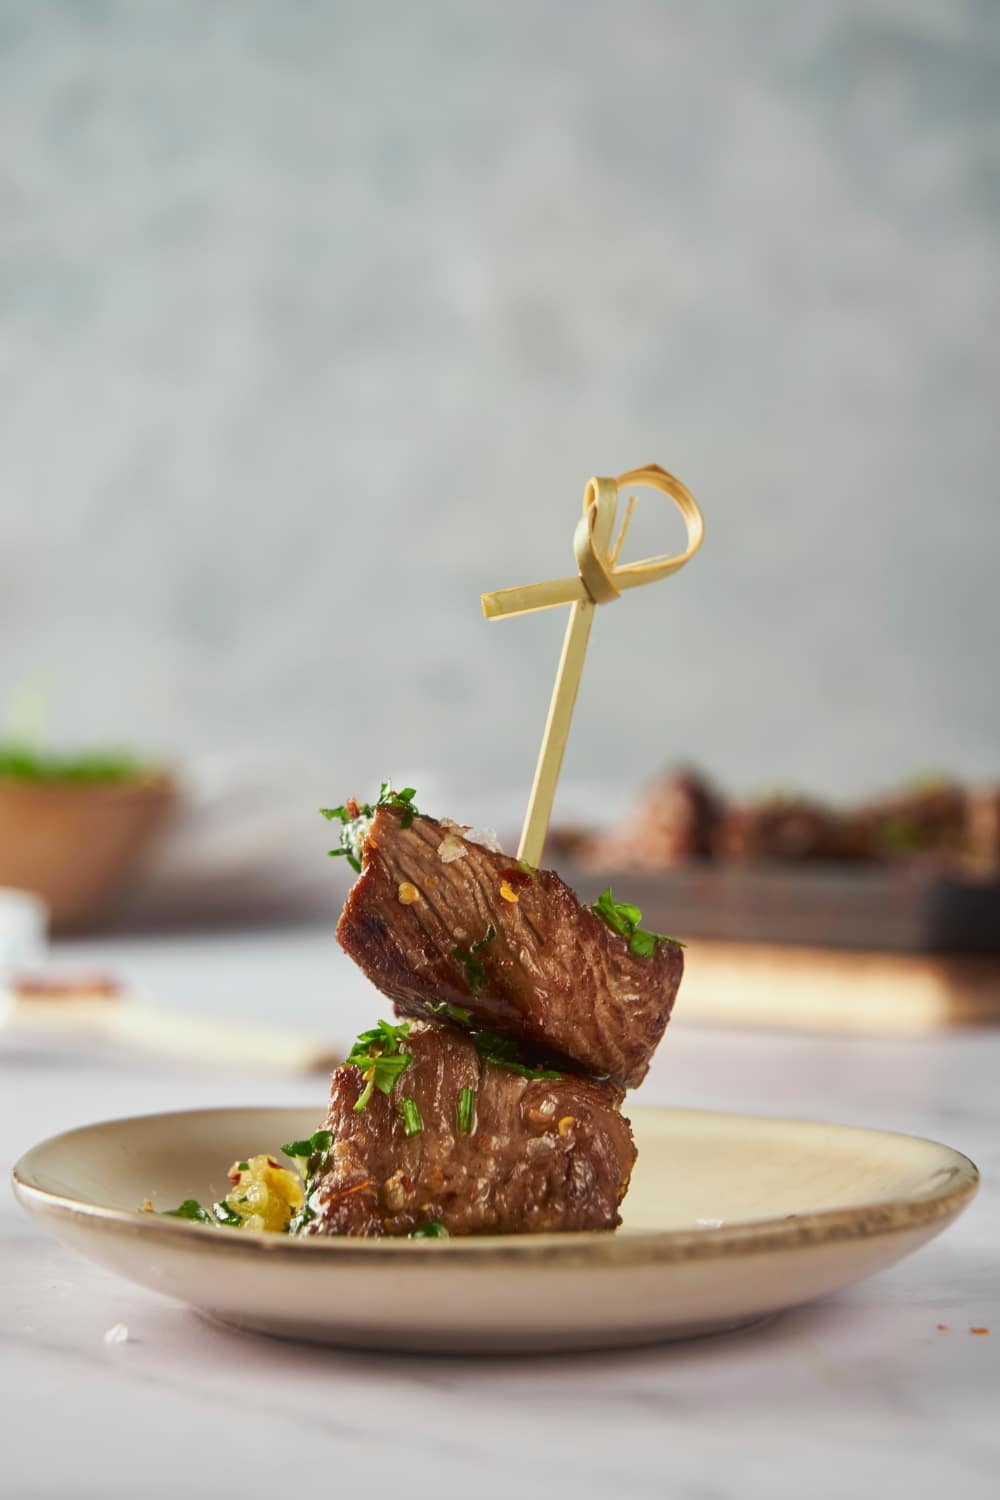 Two garlic steak bites on a gold skewer plated and garnished with parsley and red pepper flakes.